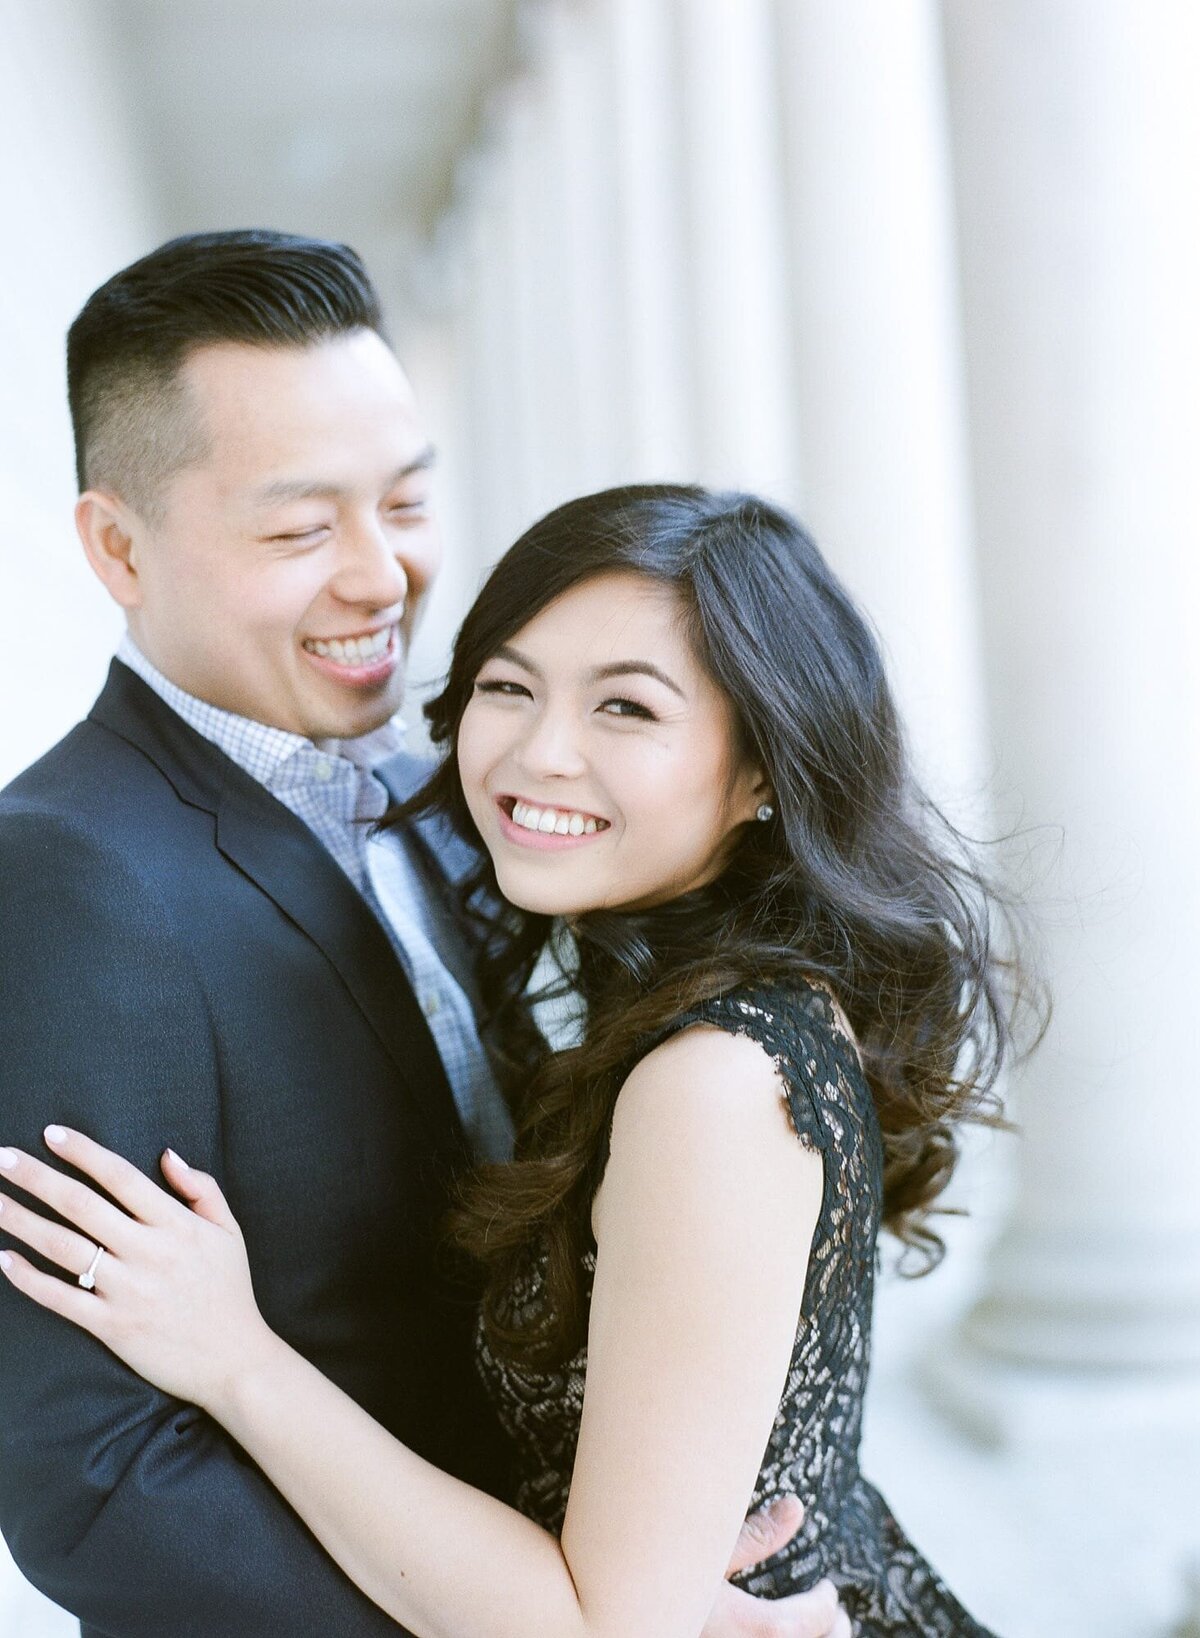 A newly engaged couple embrace each other and pose for Engagement Photographer Robin Jolin.